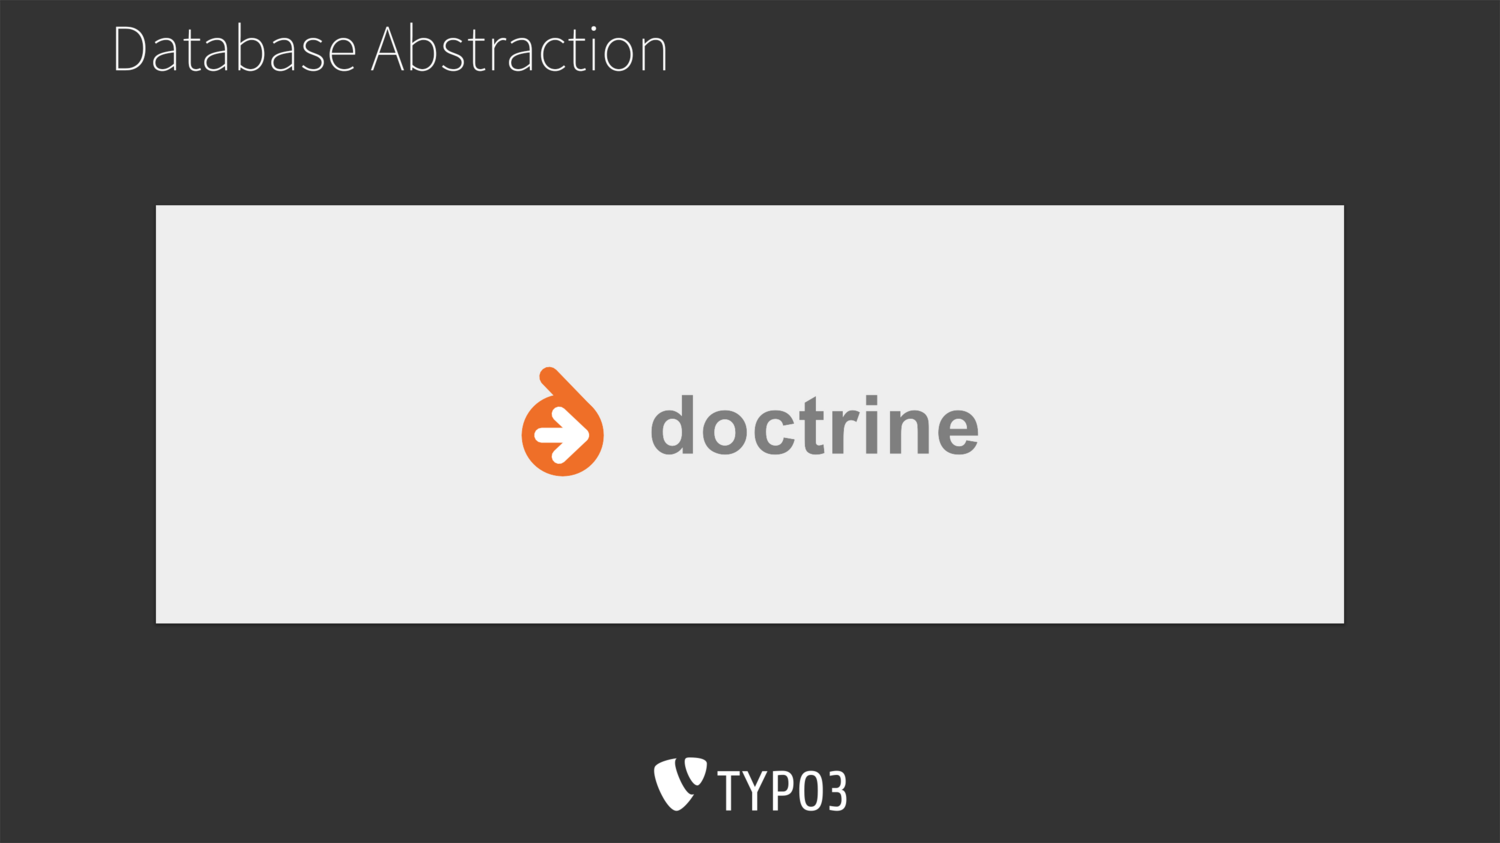 Database abstraction - Doctrine